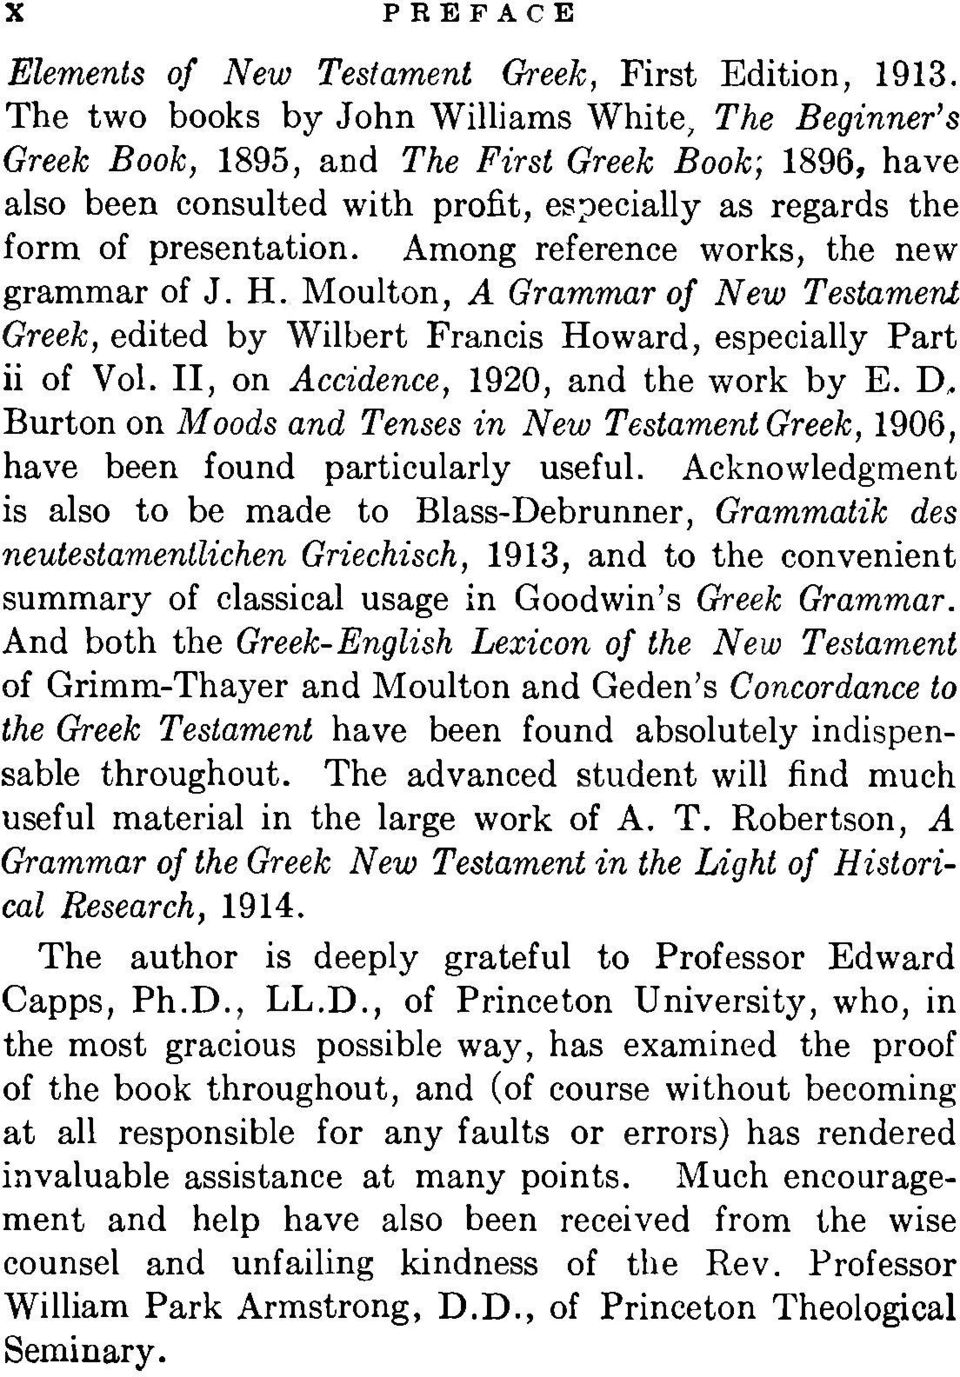 Among reference works, the new grammar of J. H. Moulton, A Grammar of New Testament Greek, edited by Wilbert Francis Howard, especially Part ii of Vol. II, on Accidence, 1920, and the work by E.